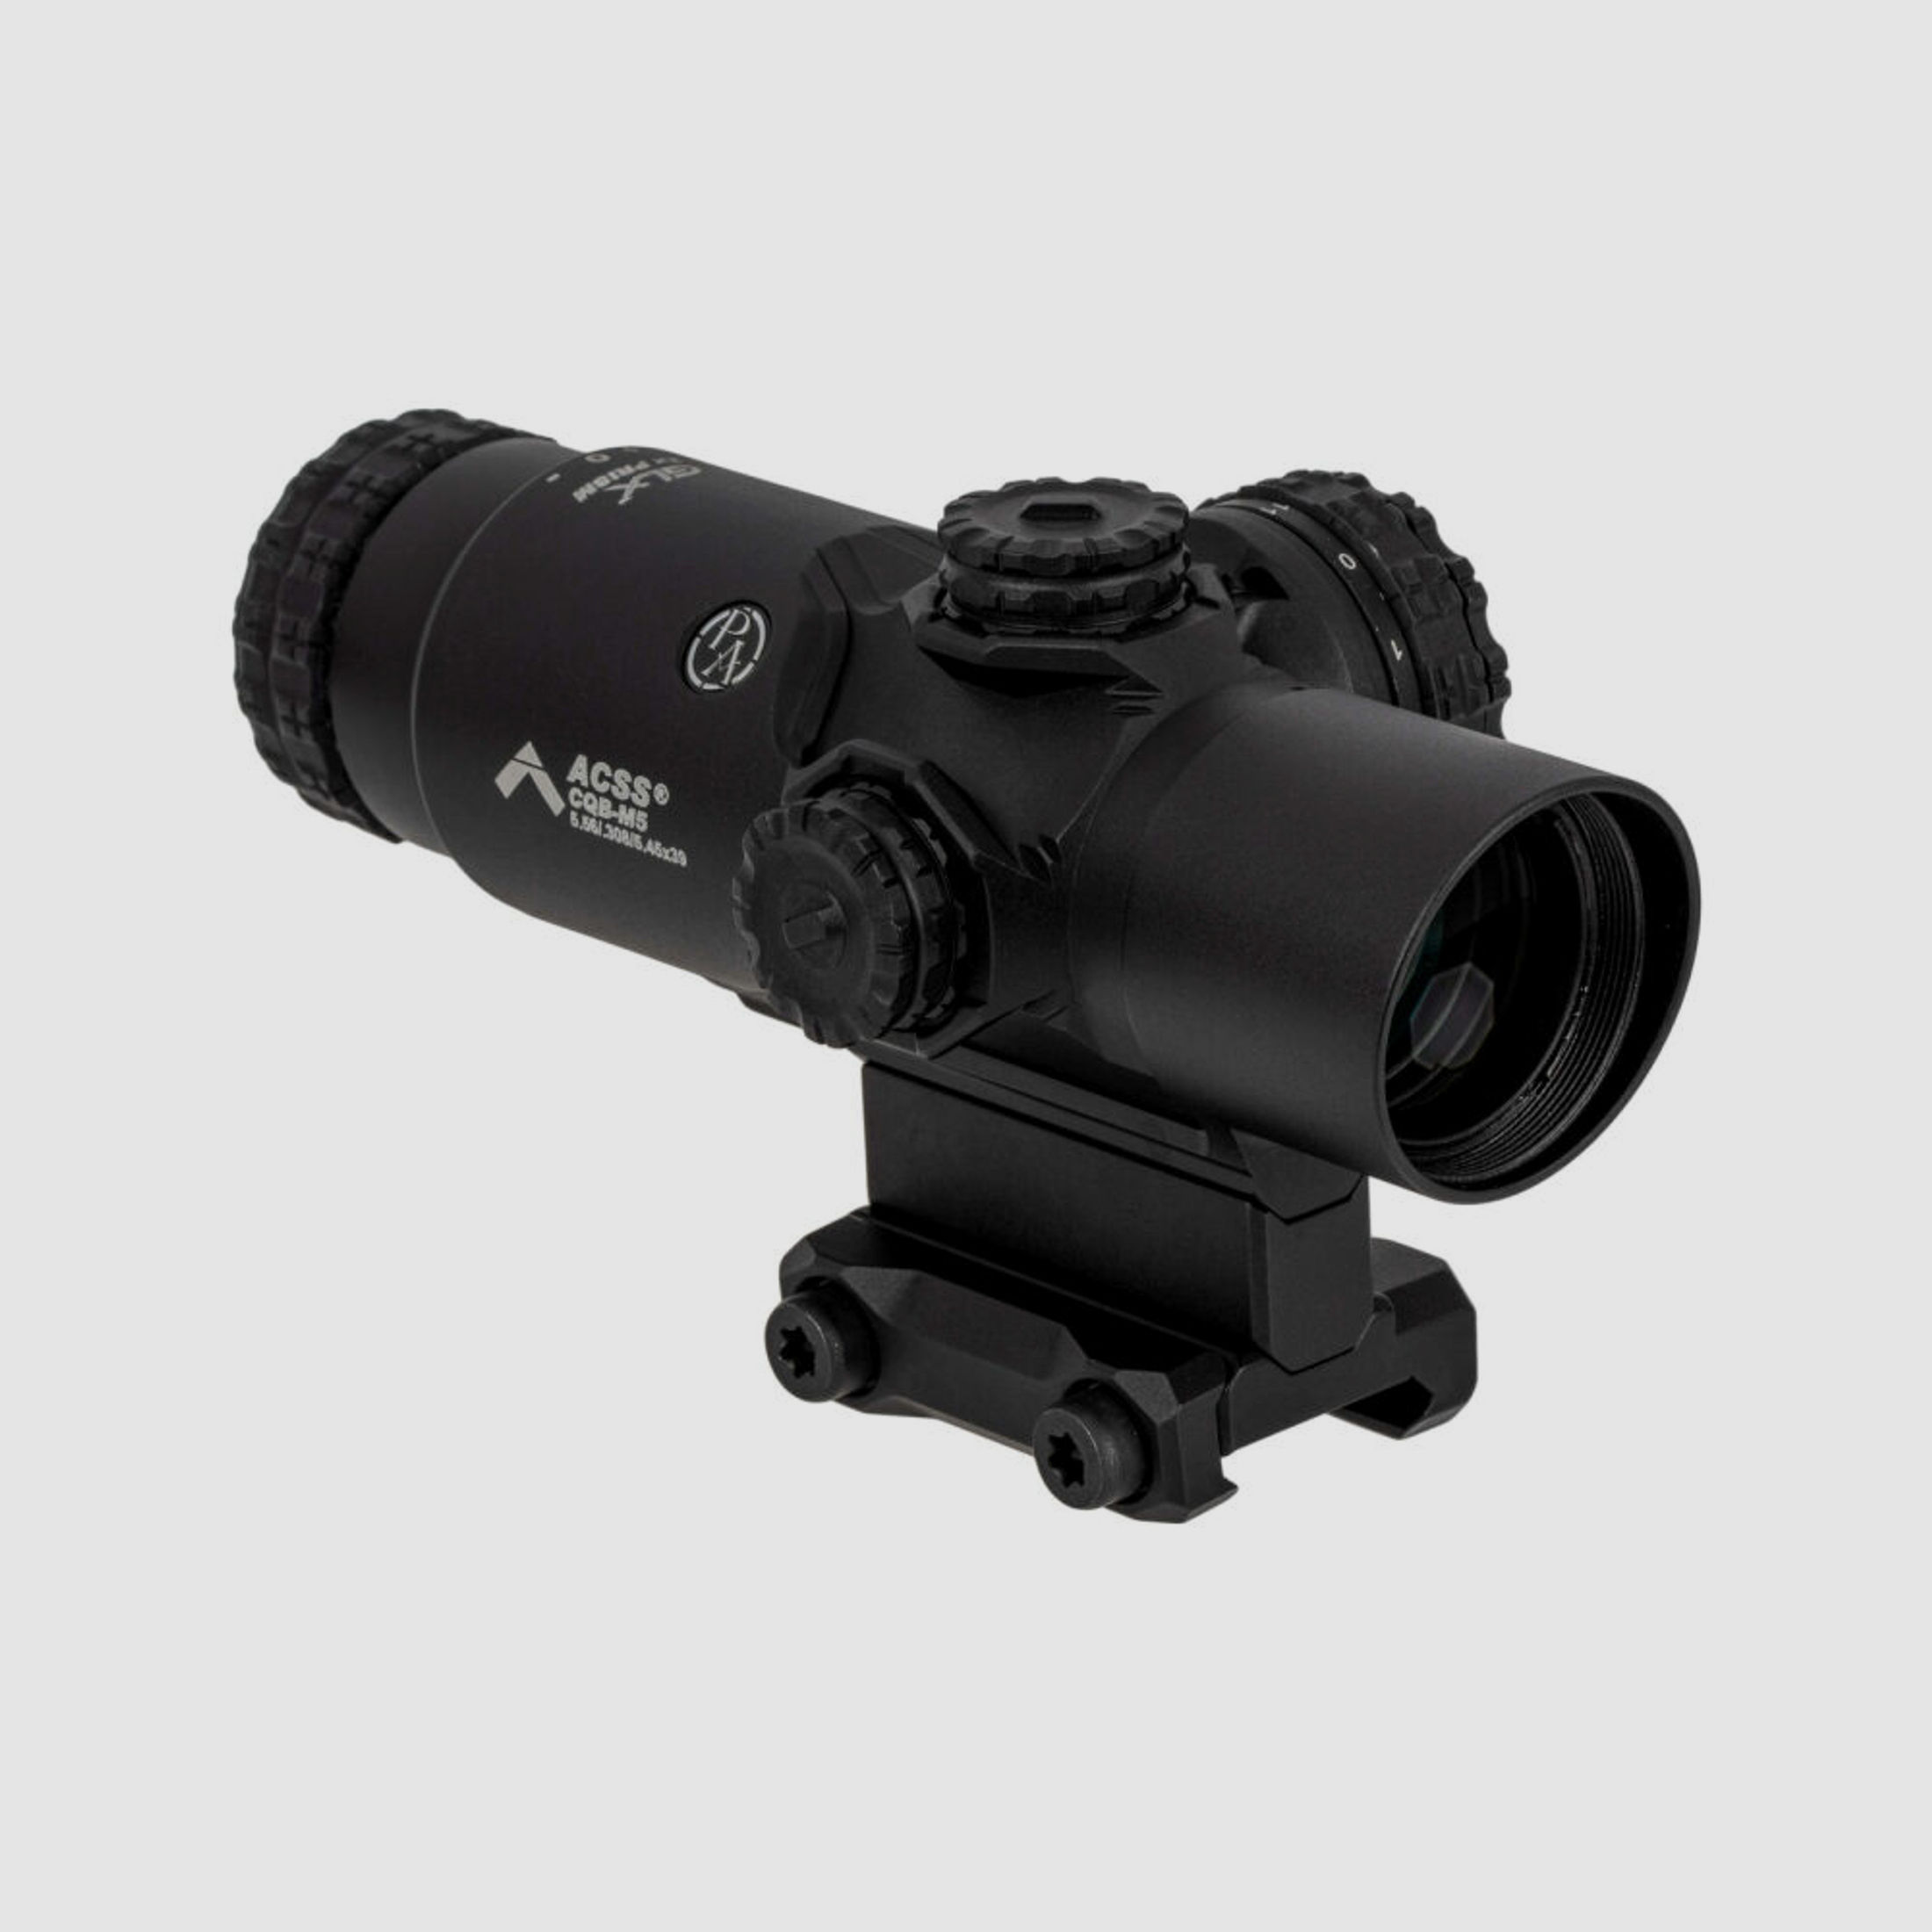 Primary Arms	 GLx 2xPrism Scope ACSS-CQB-M5 5.56